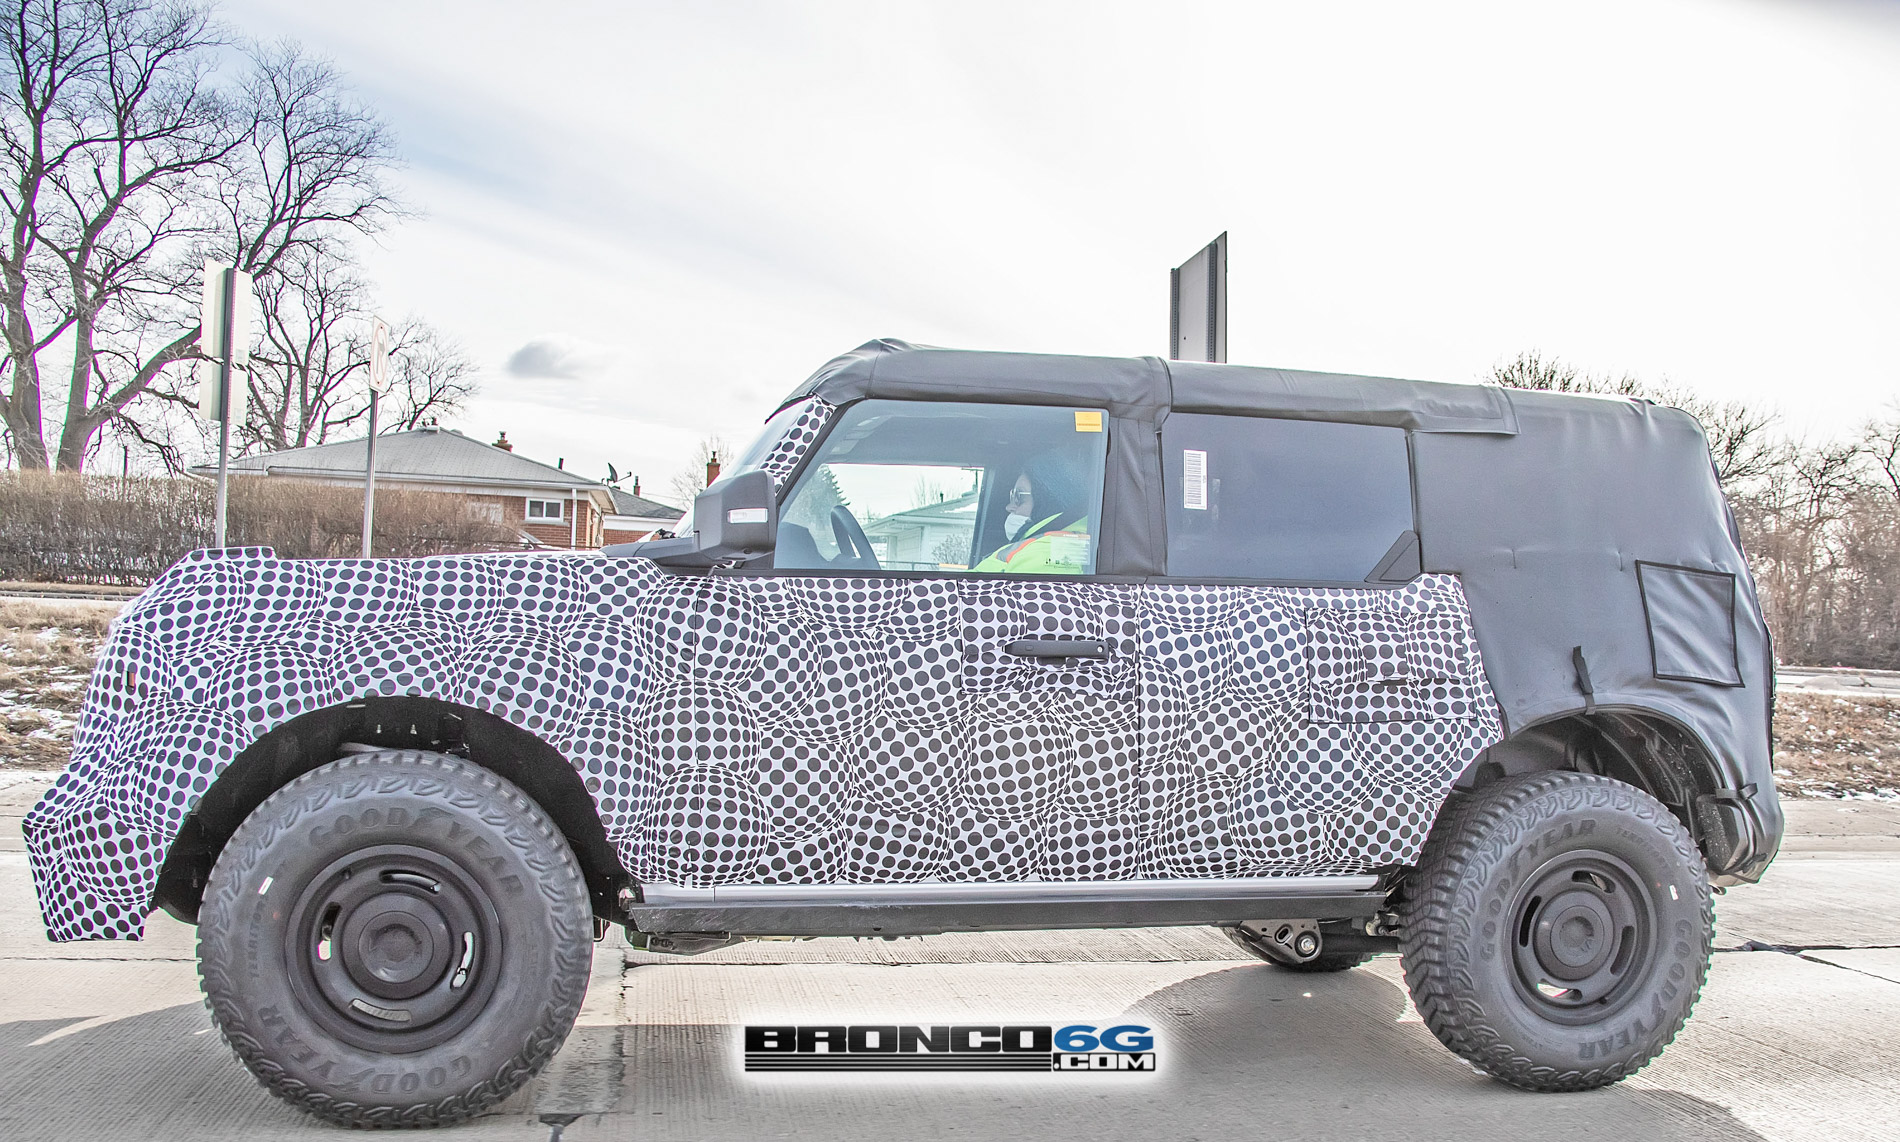 Ford Bronco HERITAGE EDITION Bronco Spied! Riding on 35's, Classic 4-Slot Wheel Design and White Grille! 1612297571023